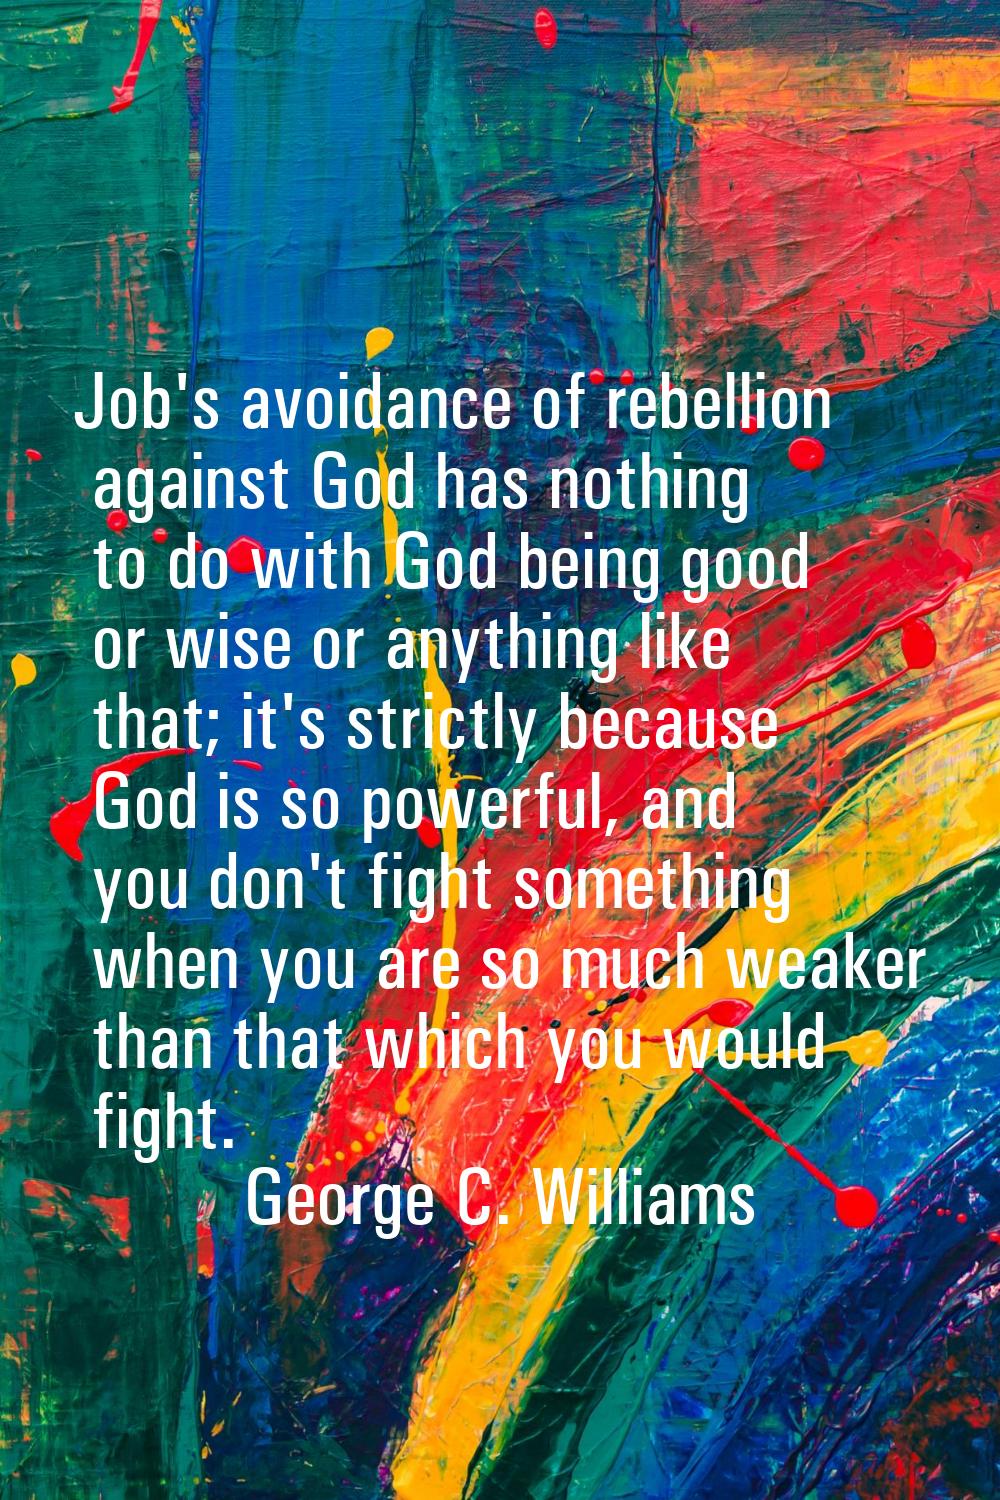 Job's avoidance of rebellion against God has nothing to do with God being good or wise or anything 